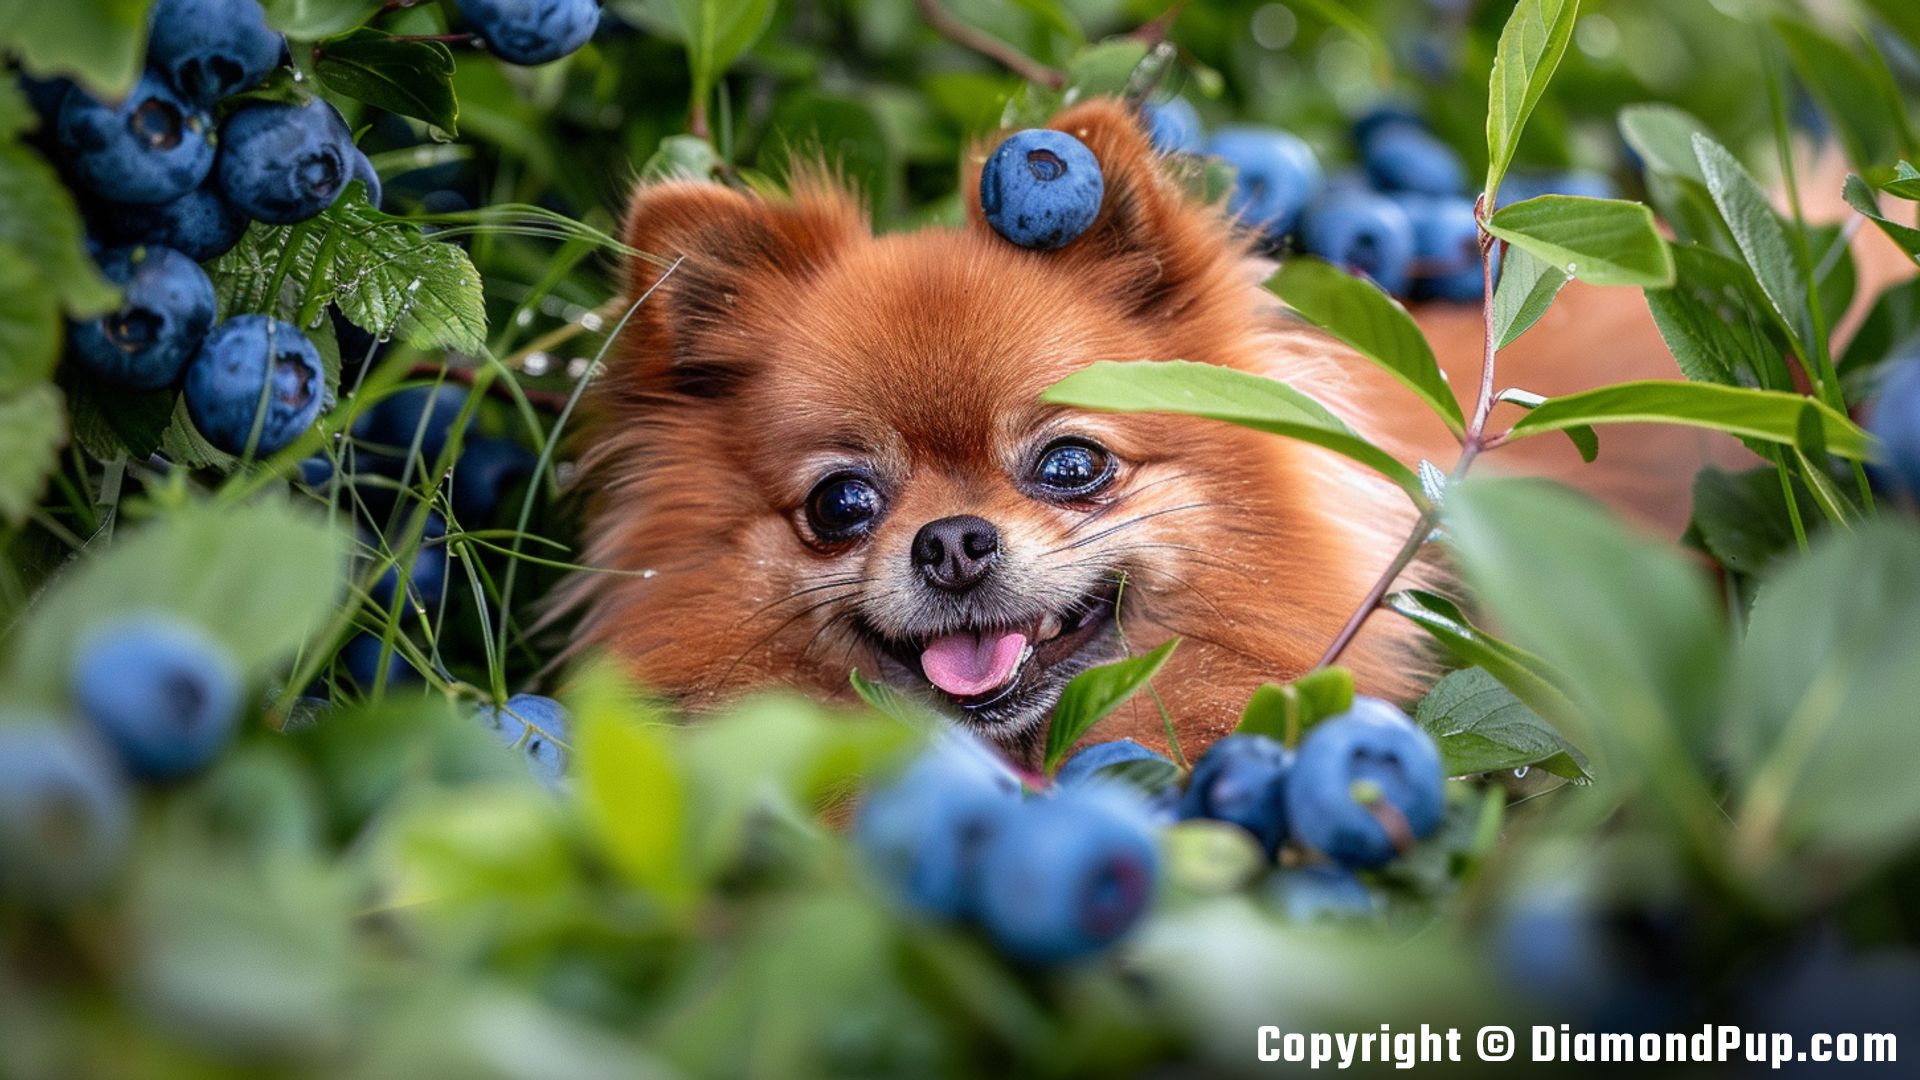 Photo of a Cute Pomeranian Eating Blueberries